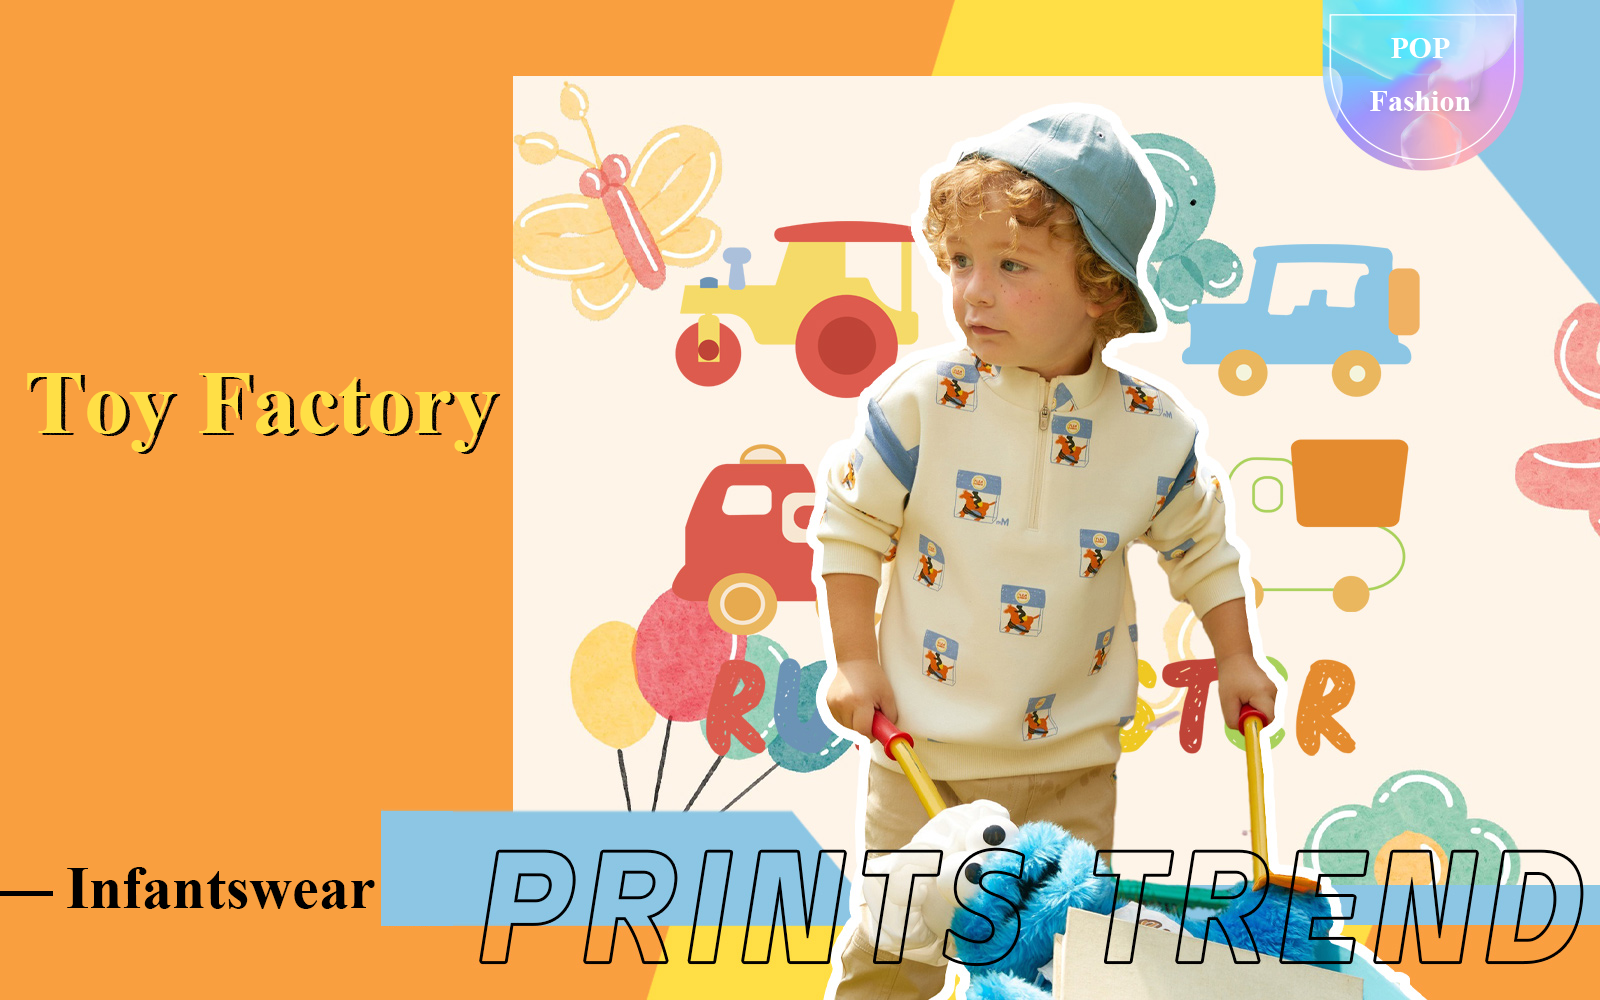 Toy Factory -- The Pattern Trend for Infantswear